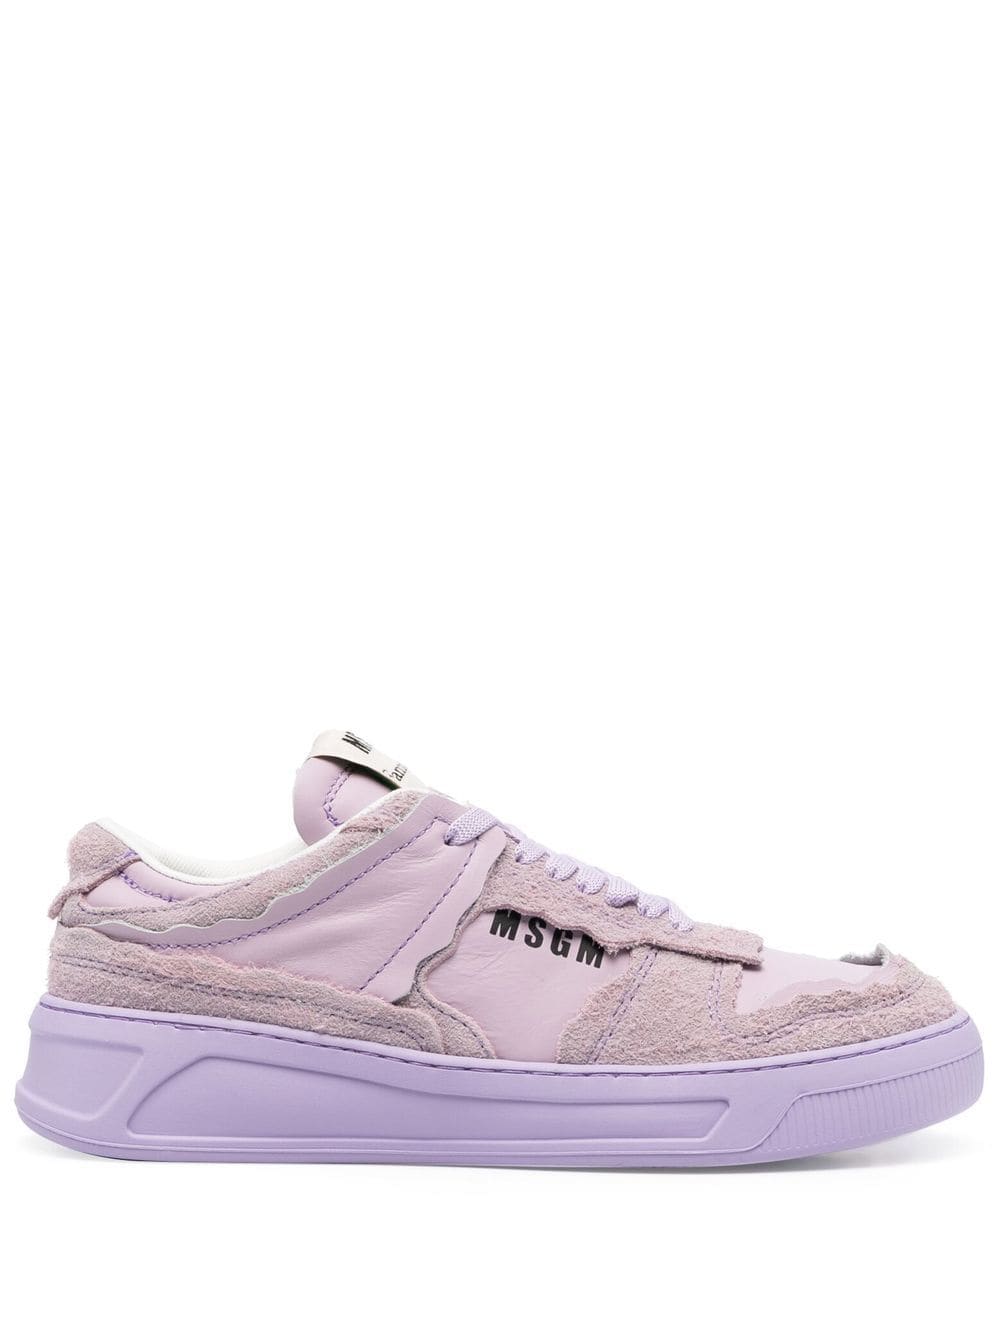 Msgm Logo-print Leather Sneakers In Purple